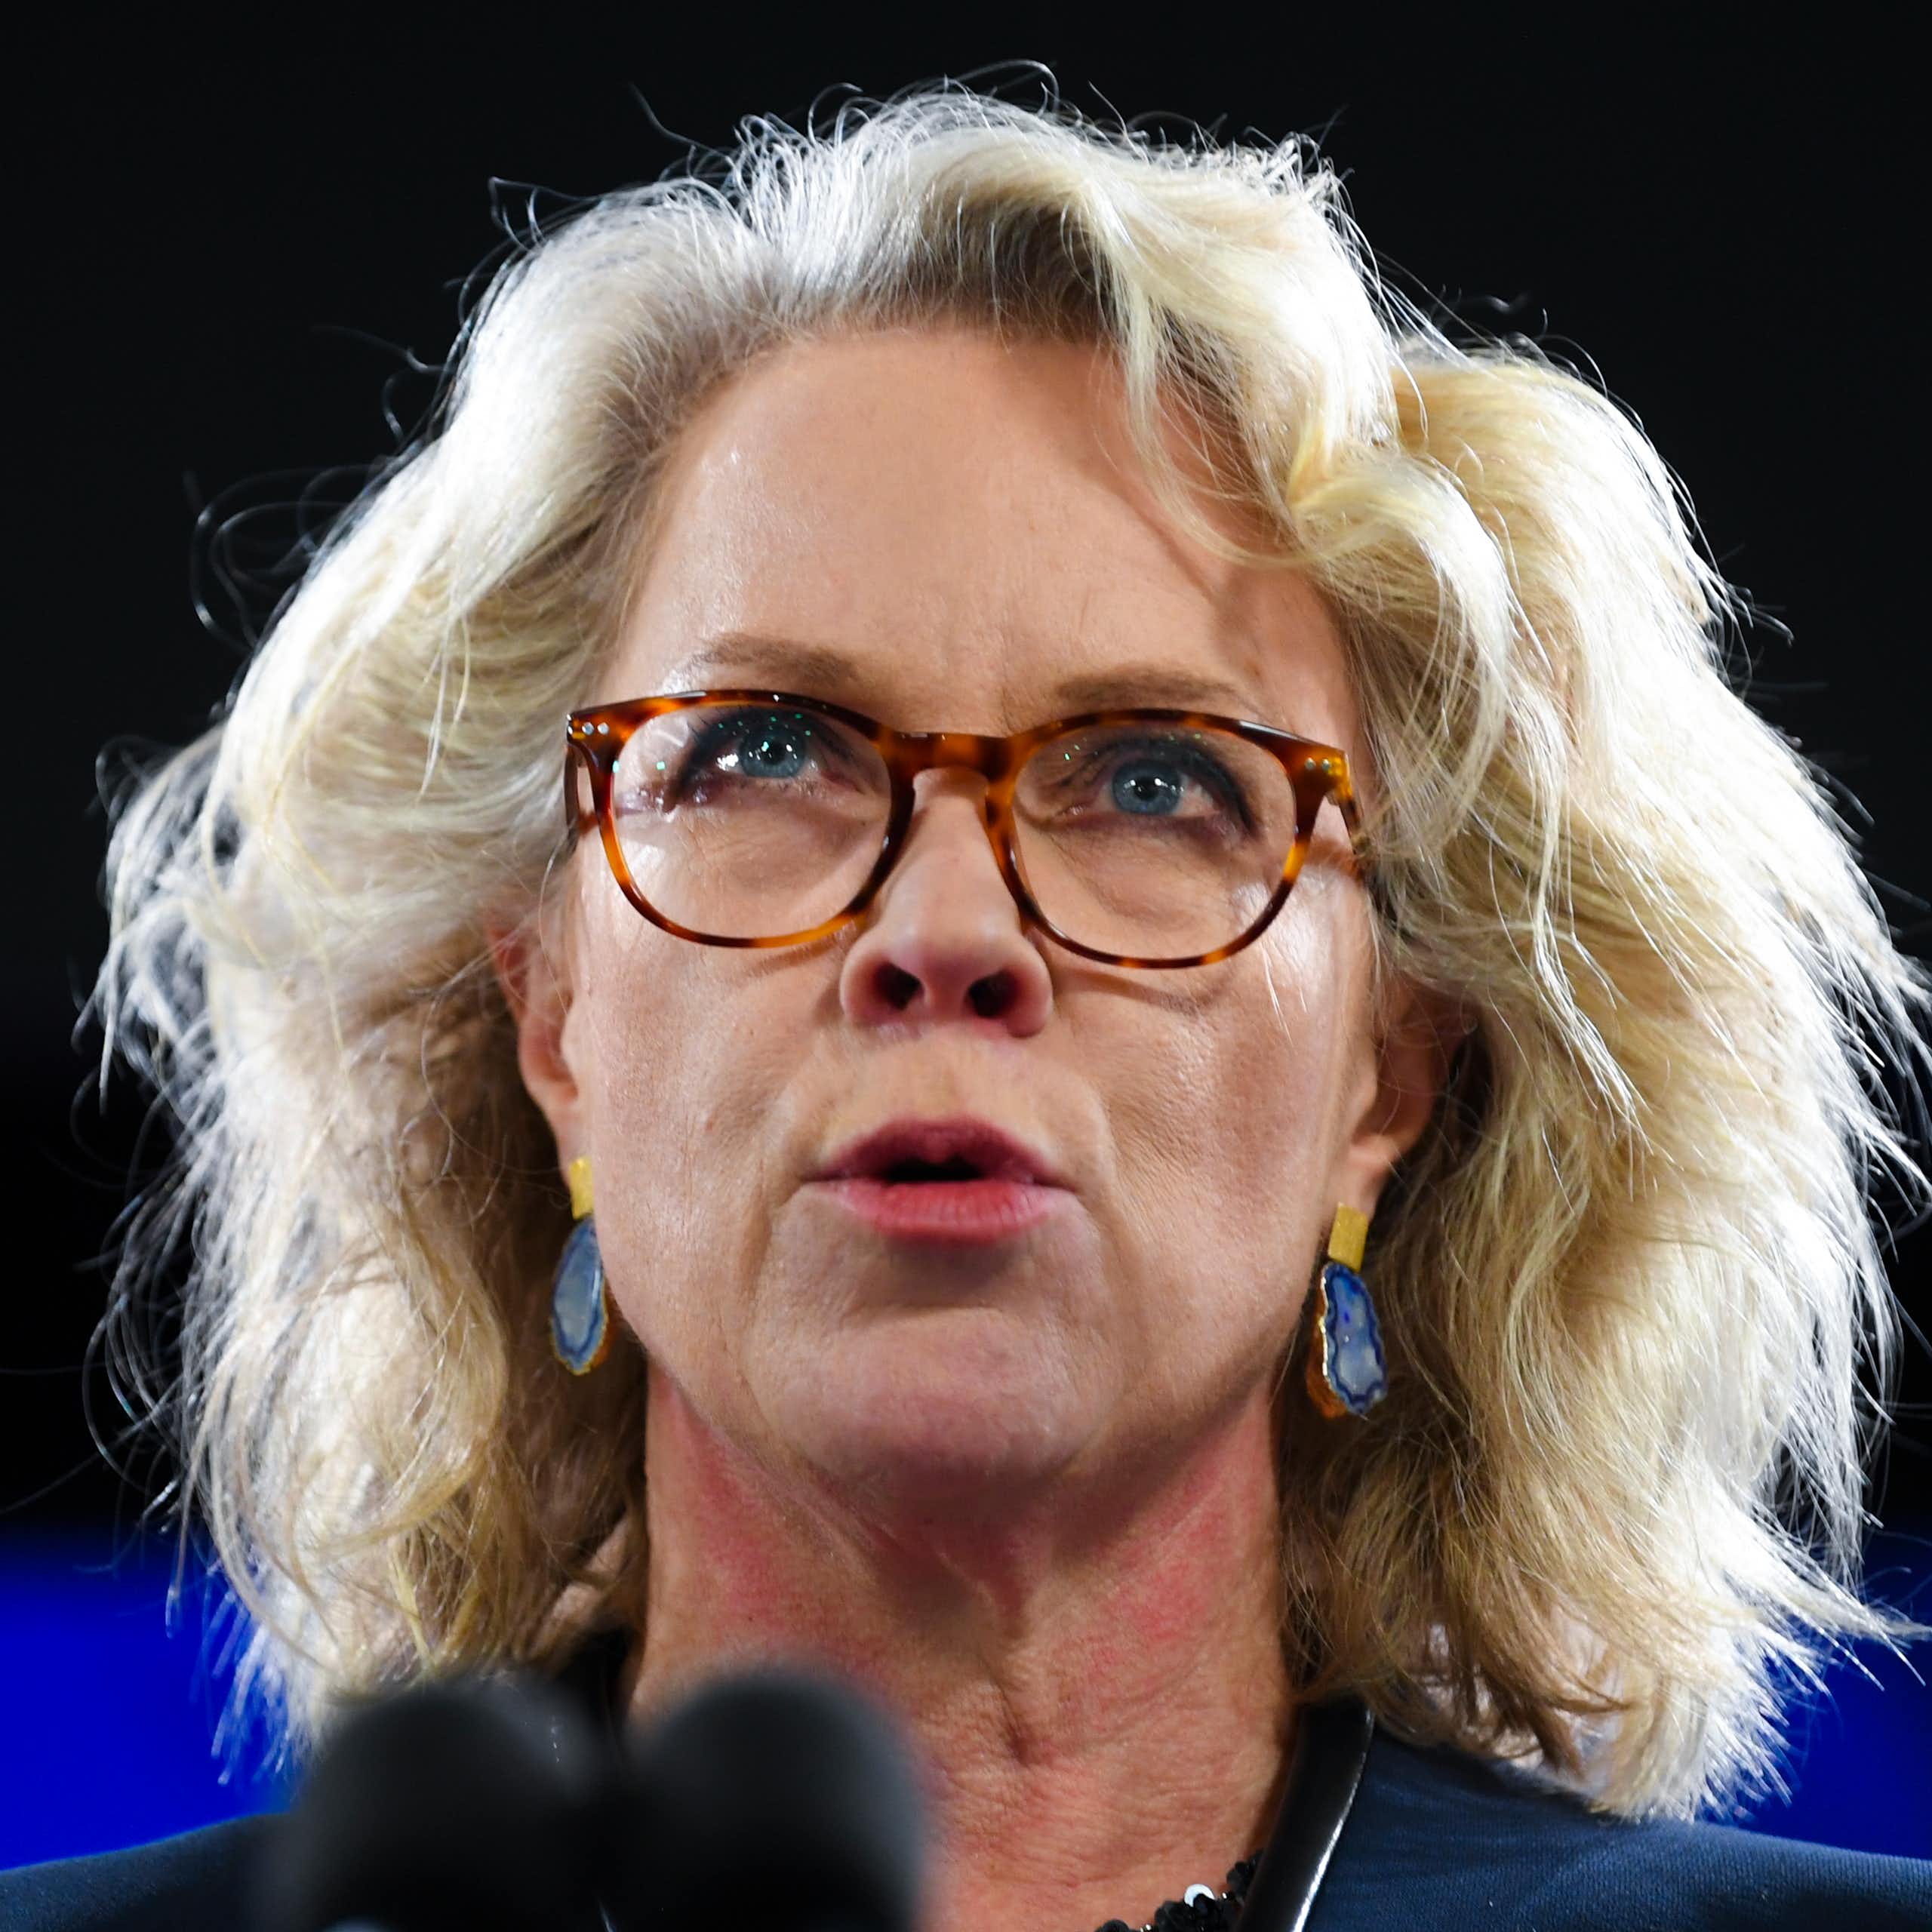 A blonde woman with glasses speaks at a podium